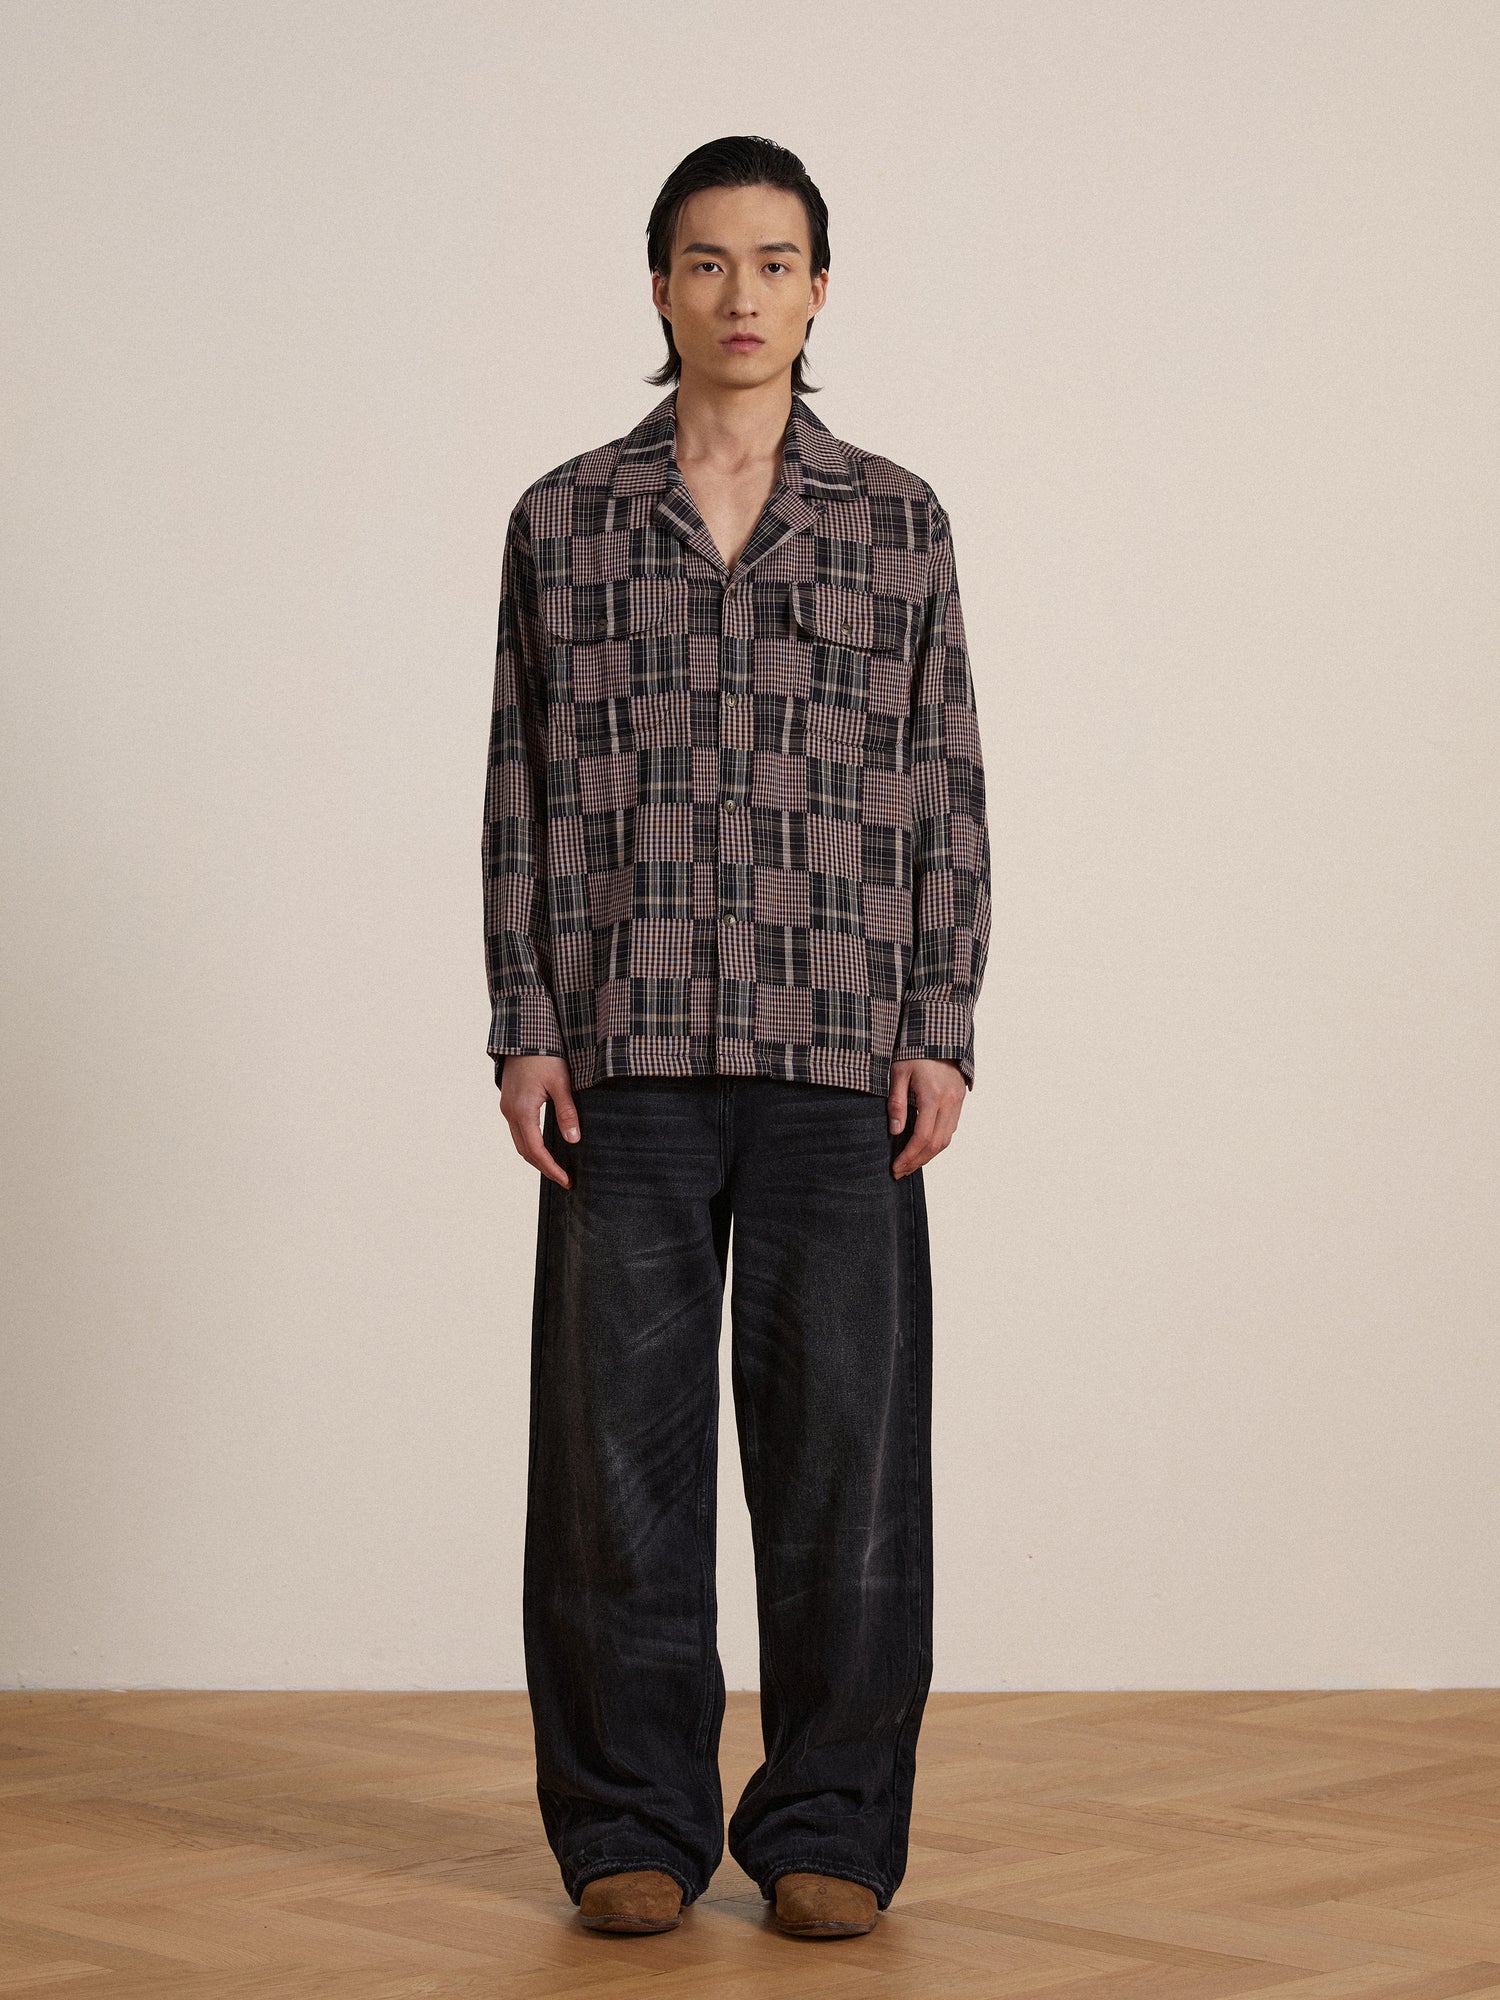 A man wearing a Found timeless silhouette multi-flannel LS camp shirt and black pants.